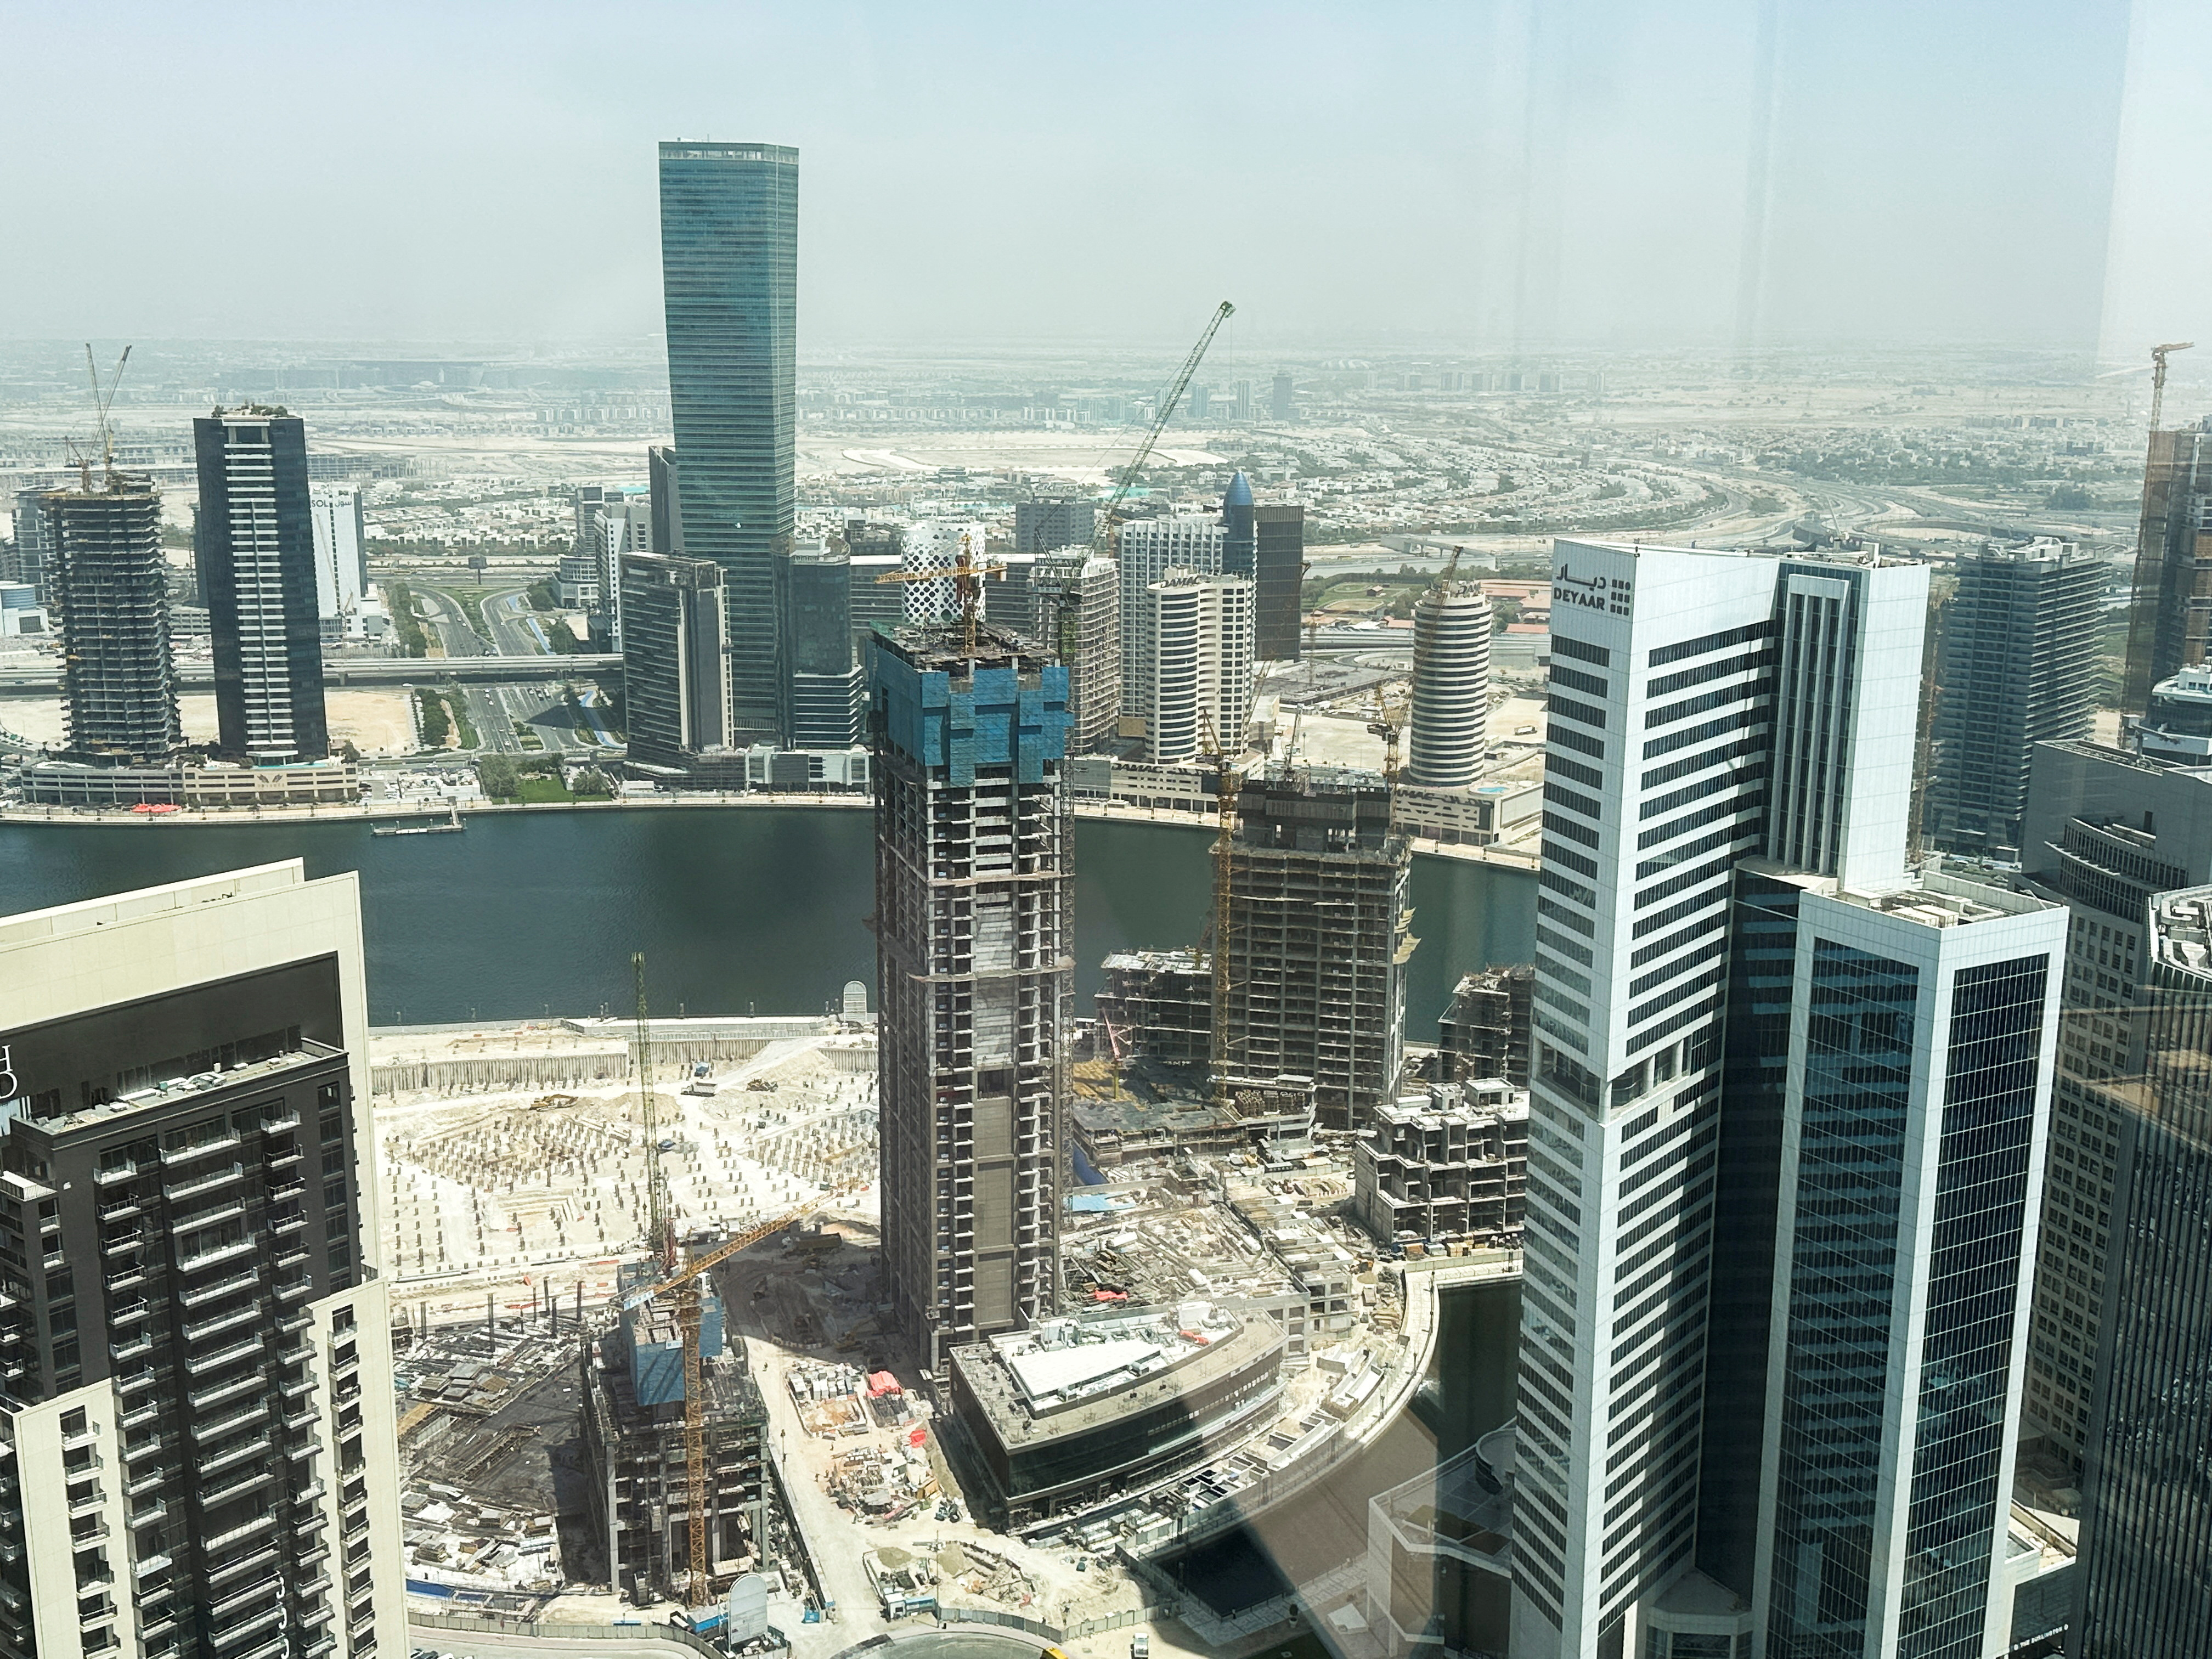 General view of a resident and business development site in Dubai